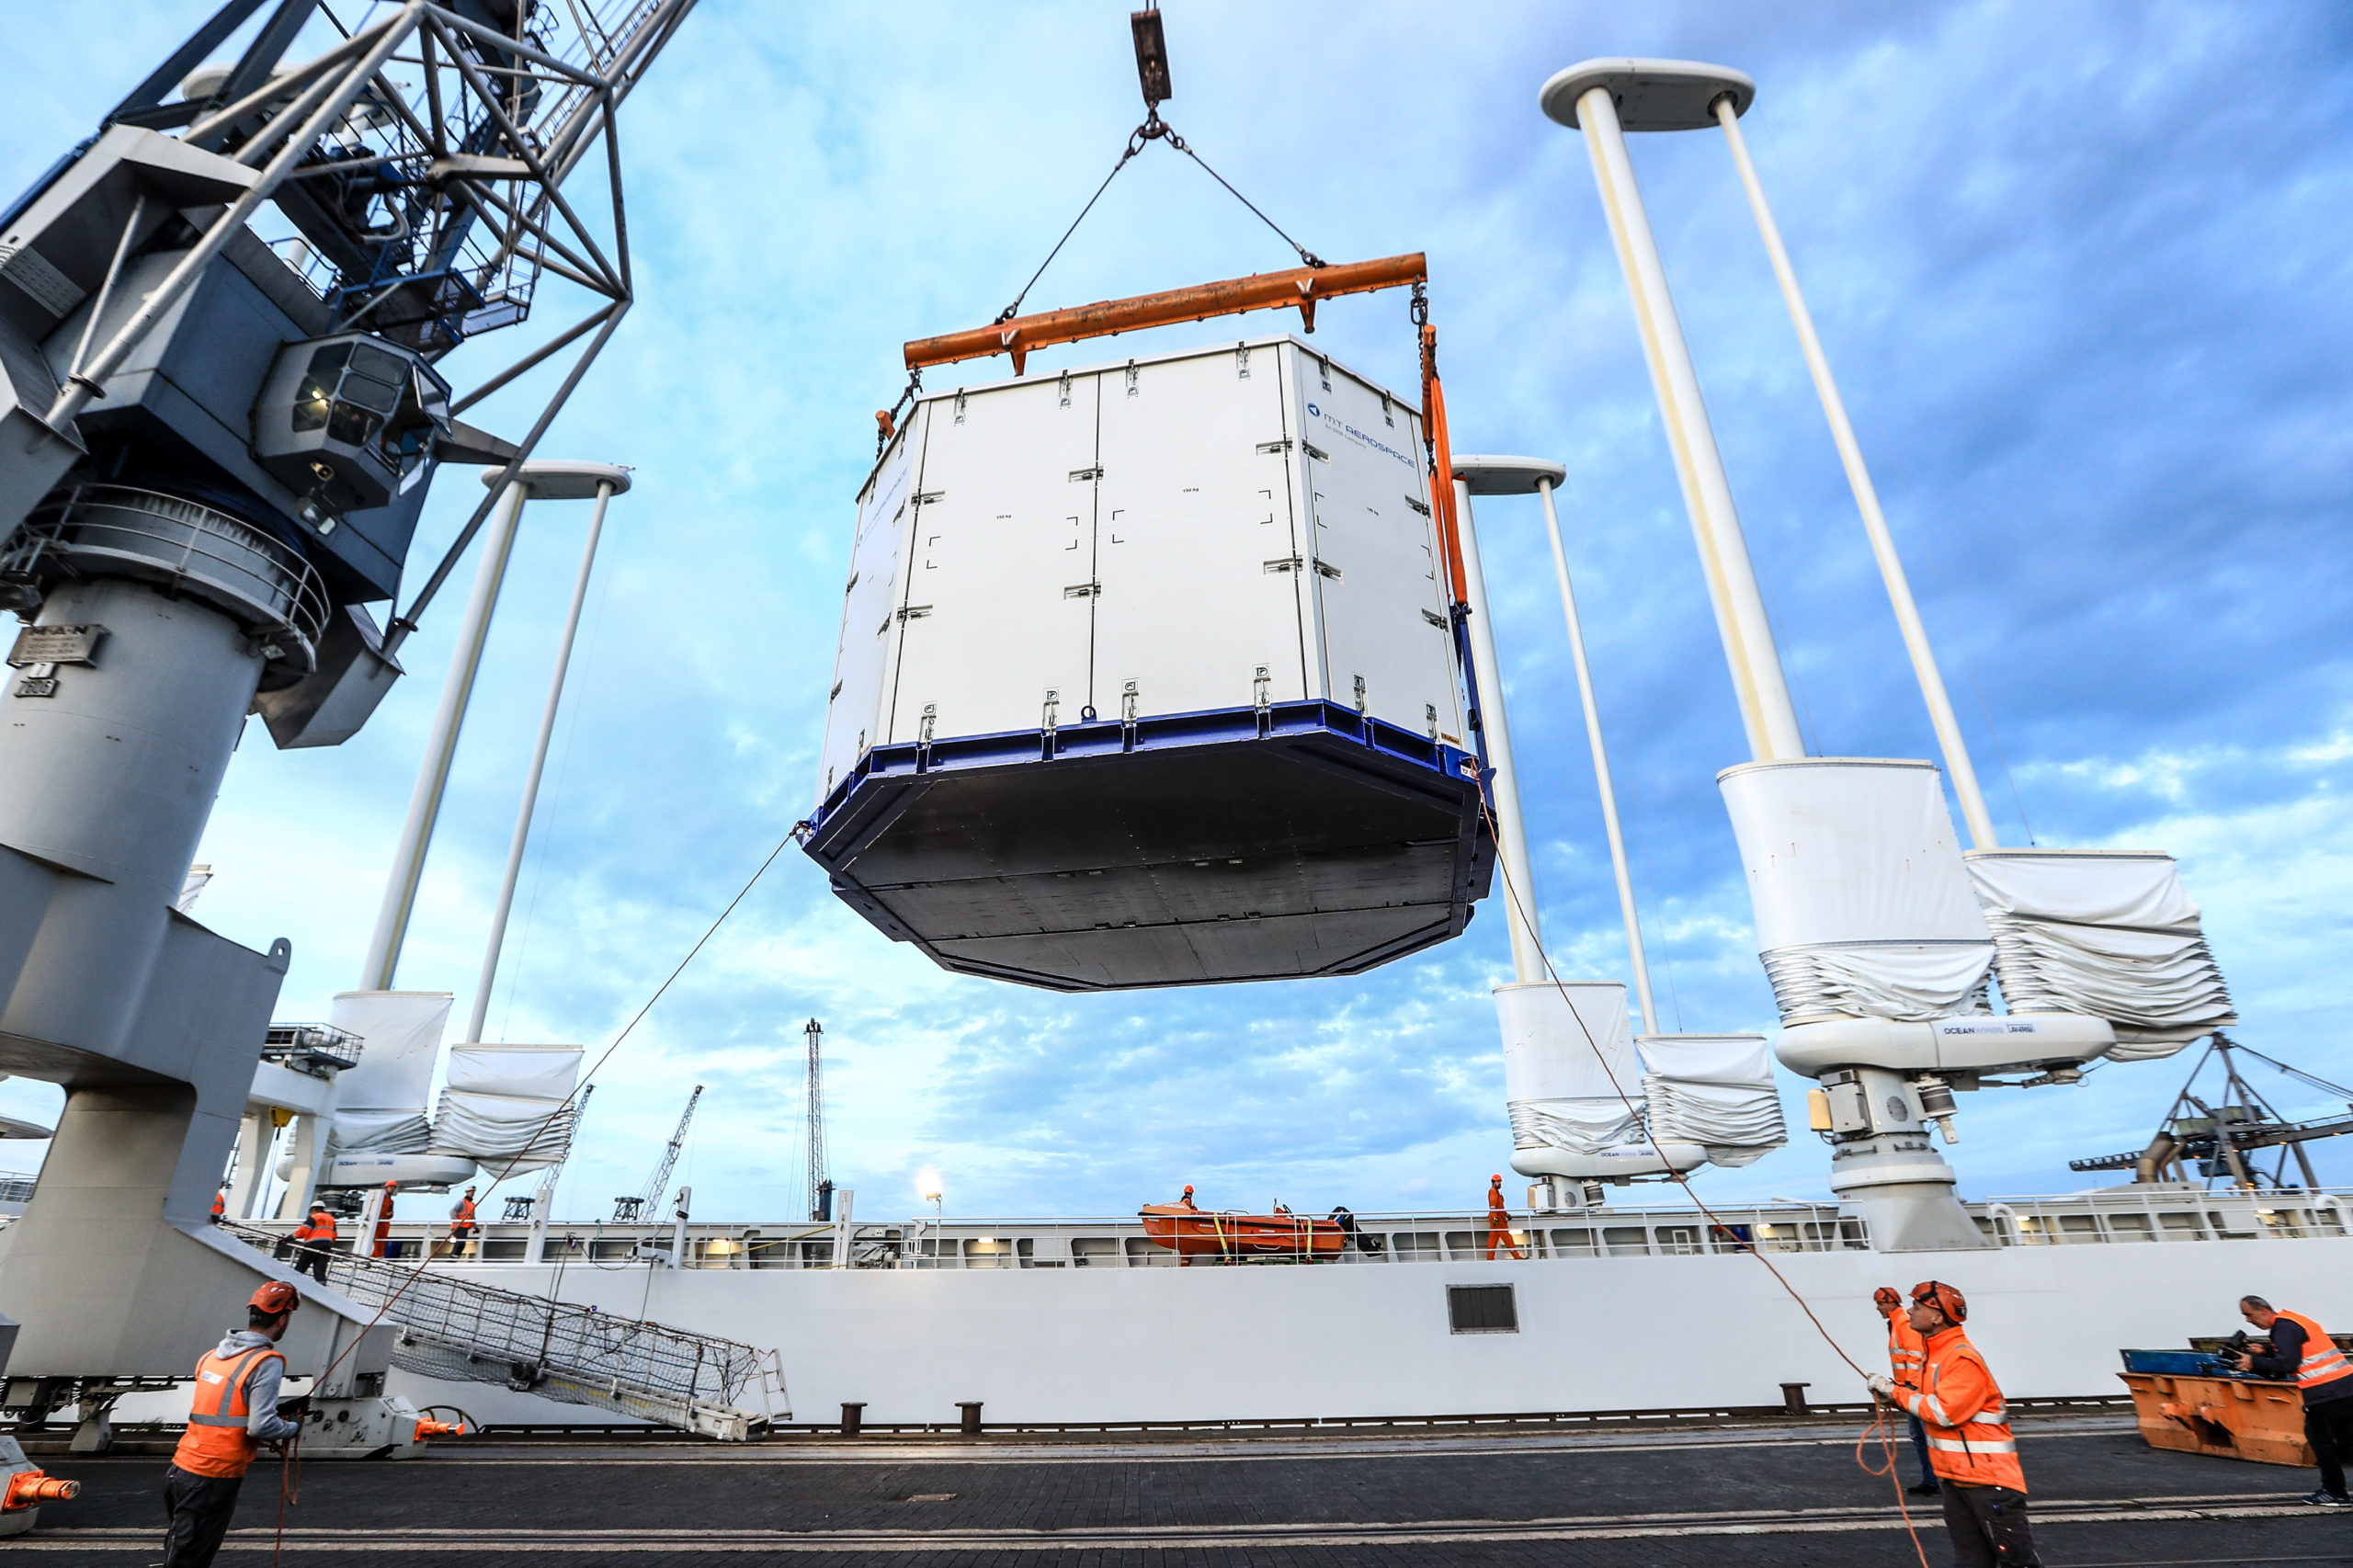 Sailing freighter Canopée loads Ariane 6 project cargo